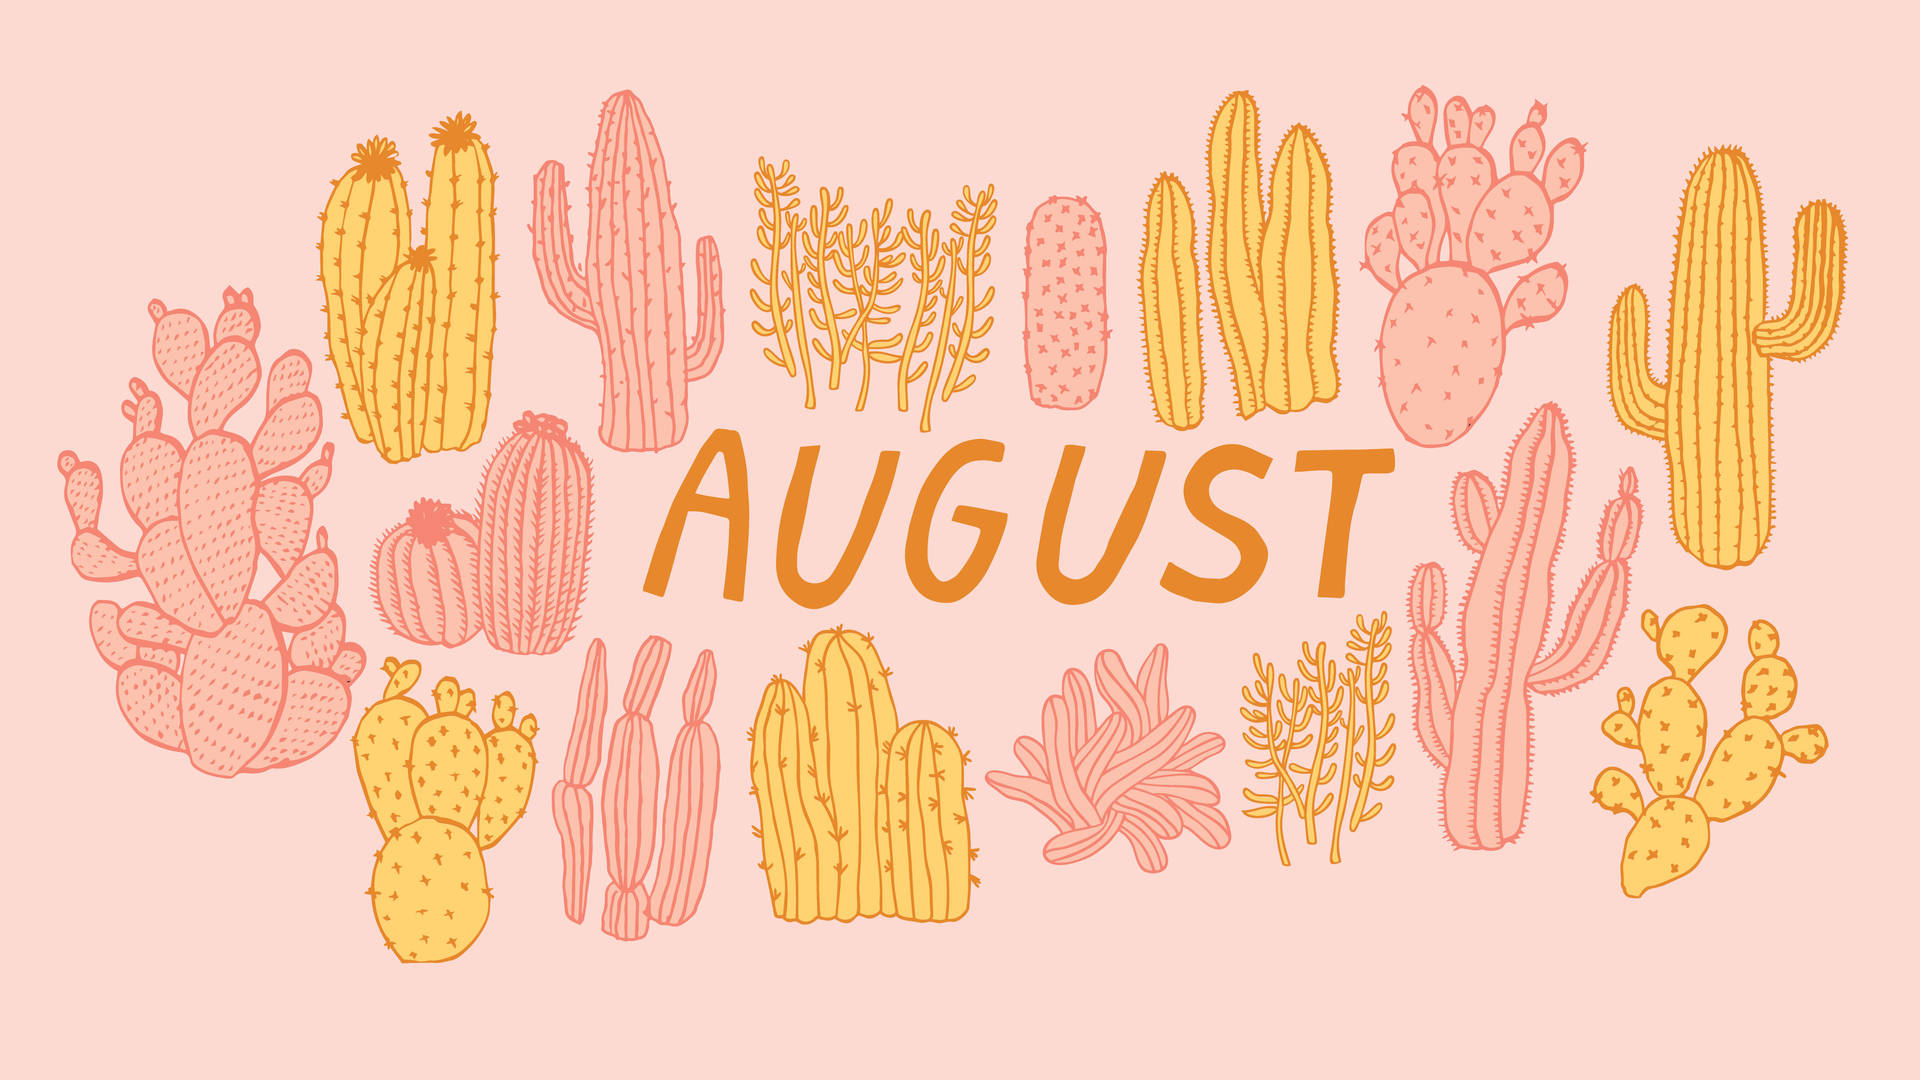 Free August Wallpaper Downloads, [100+] August Wallpapers for FREE |  